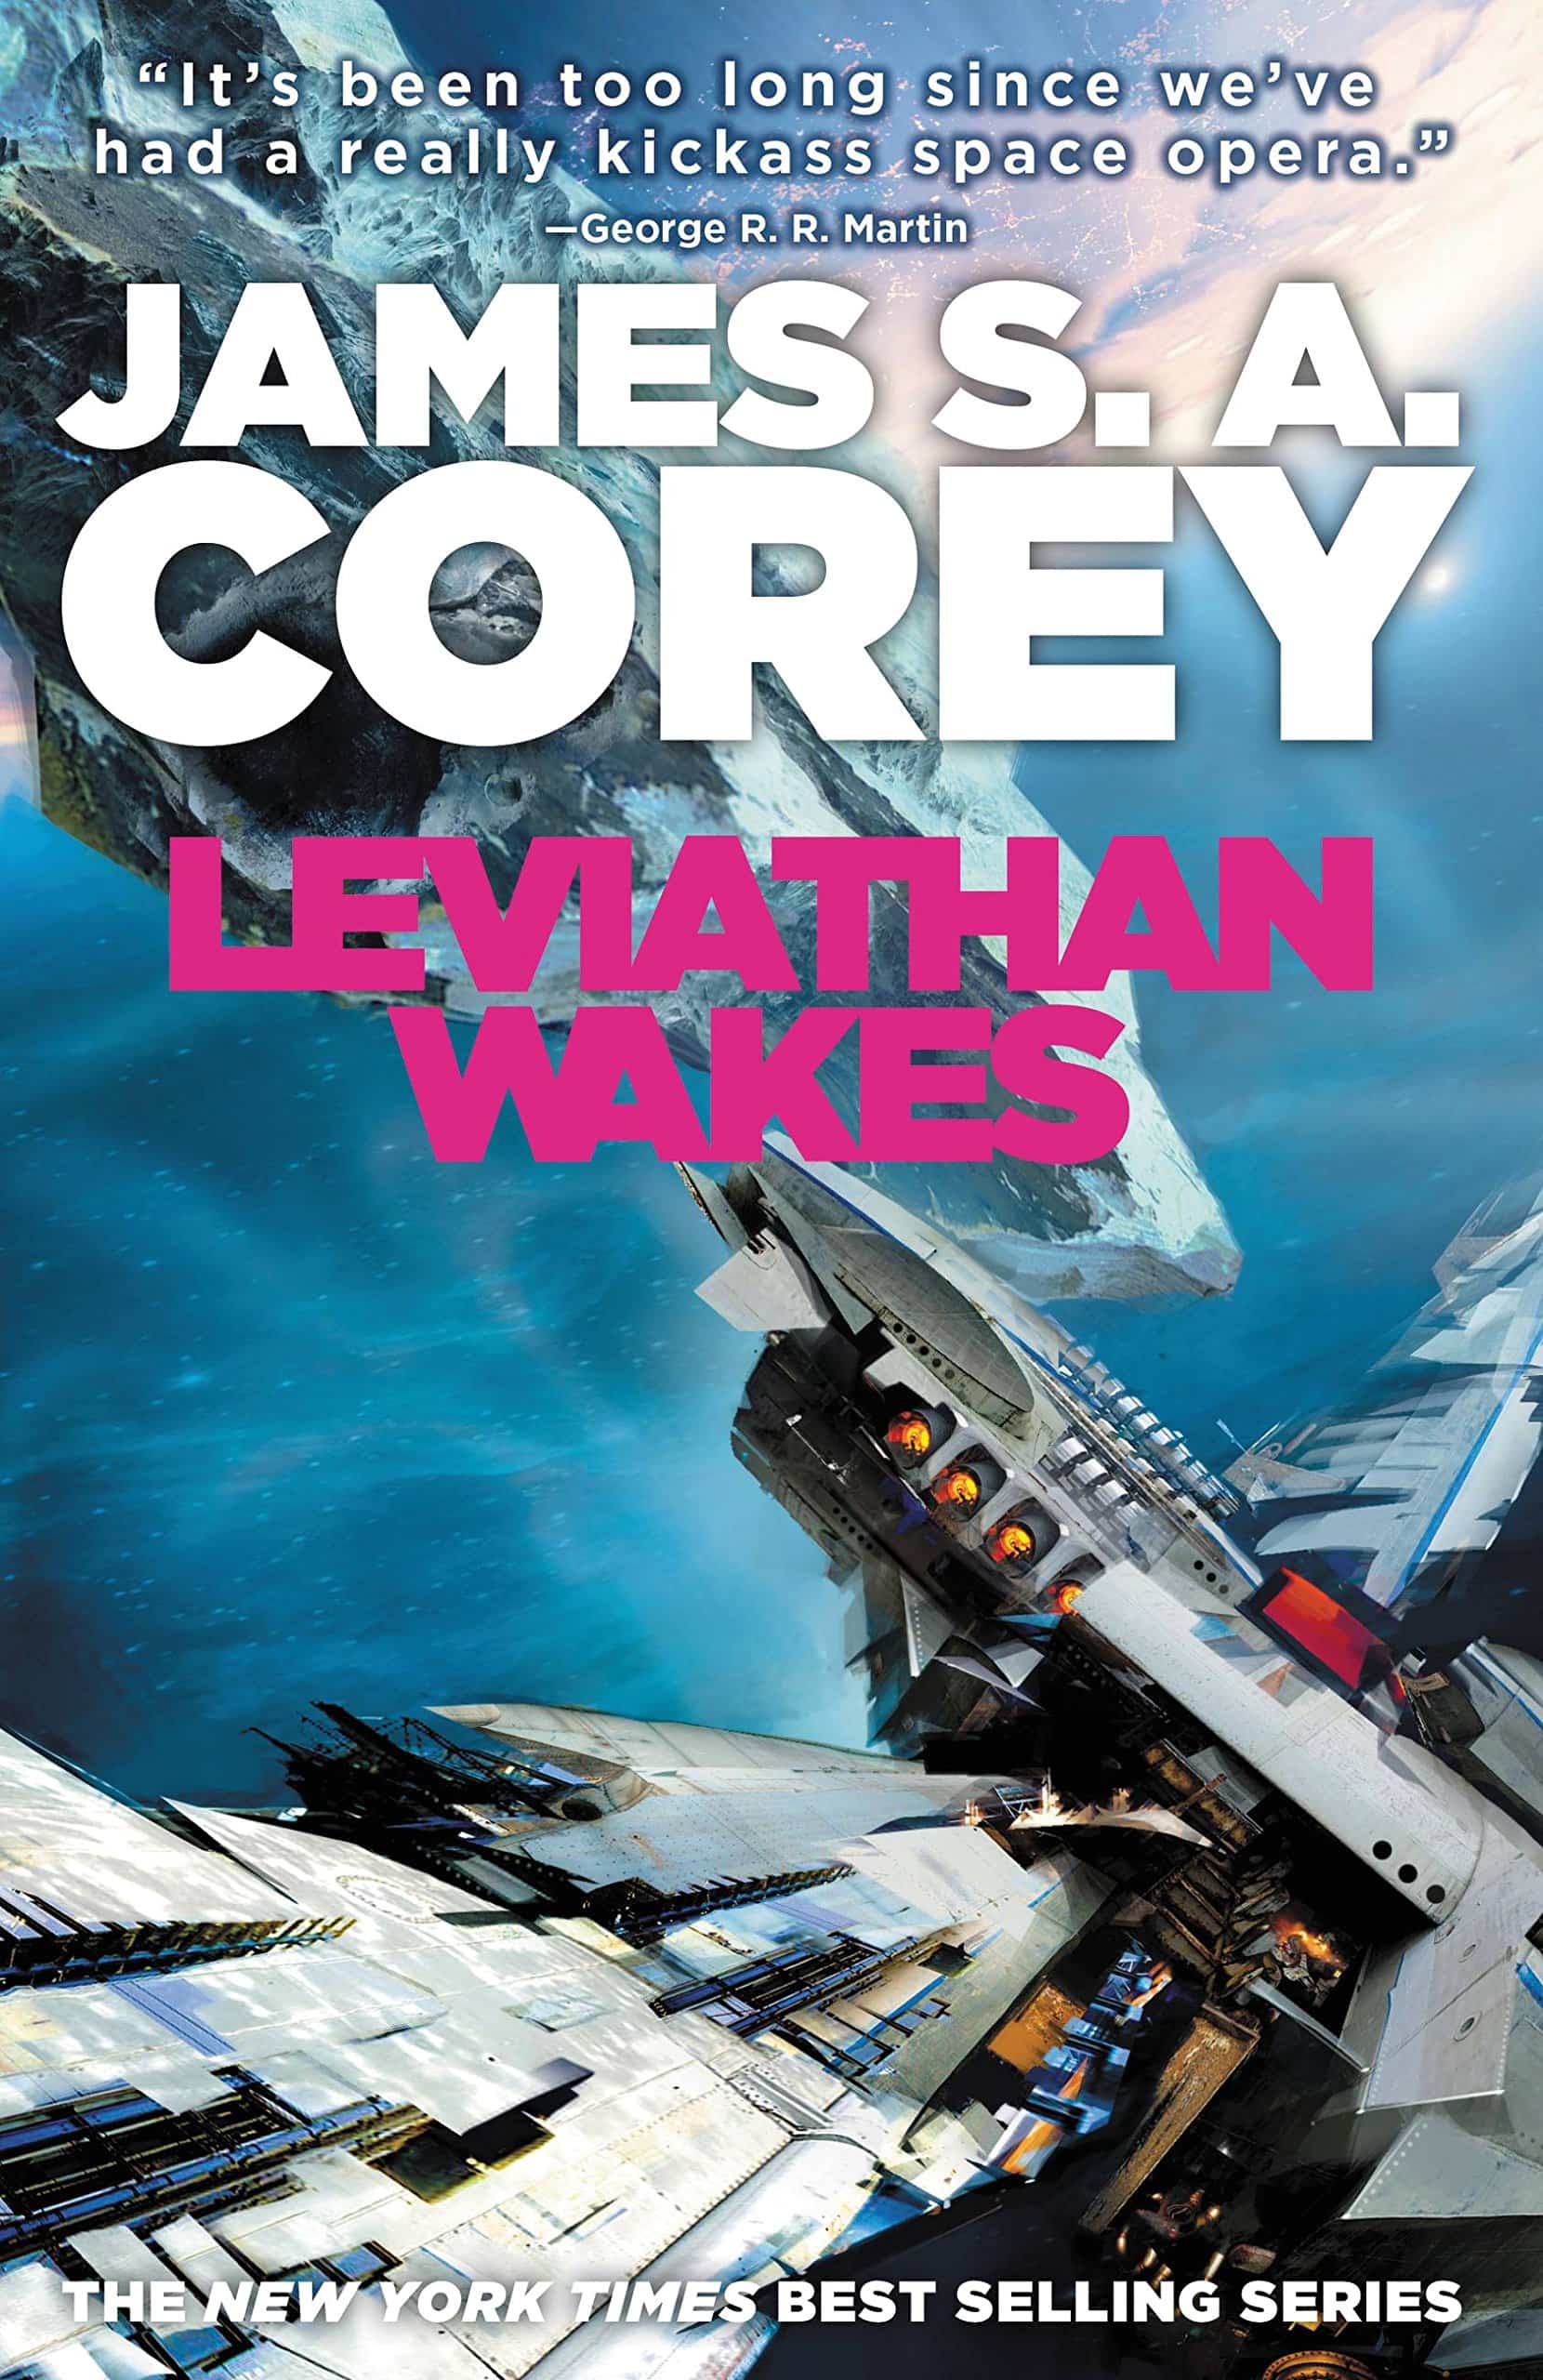 The cover of Leviathan Wakes